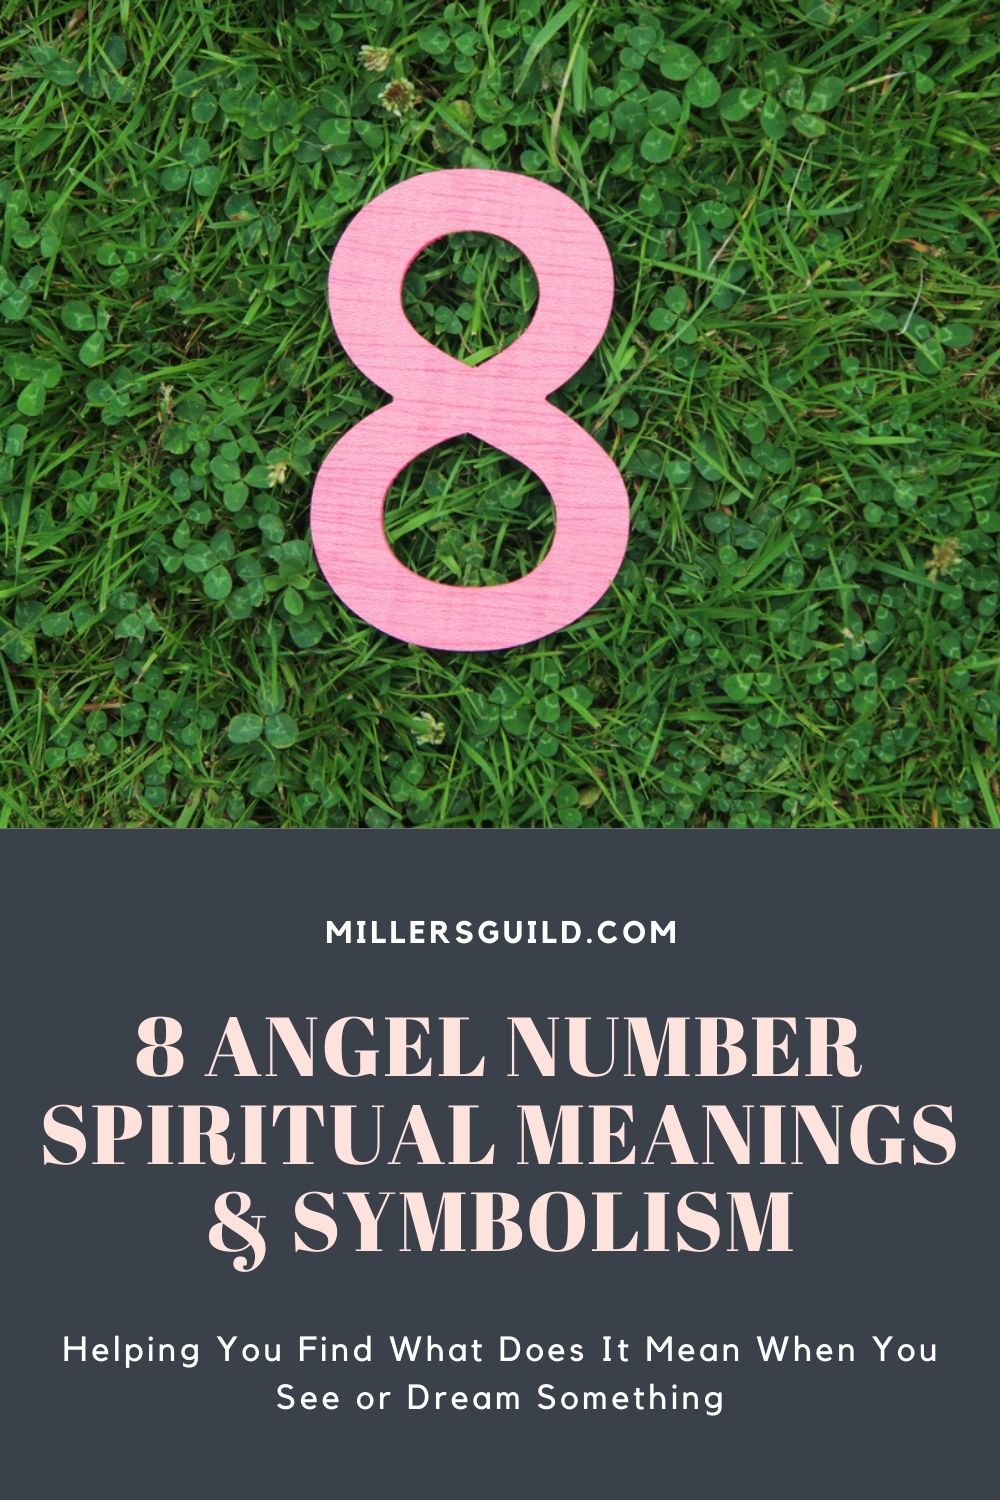 Why Do I Keep Seeing 8 Angel Number? (Spiritual Meanings & Symbolism)